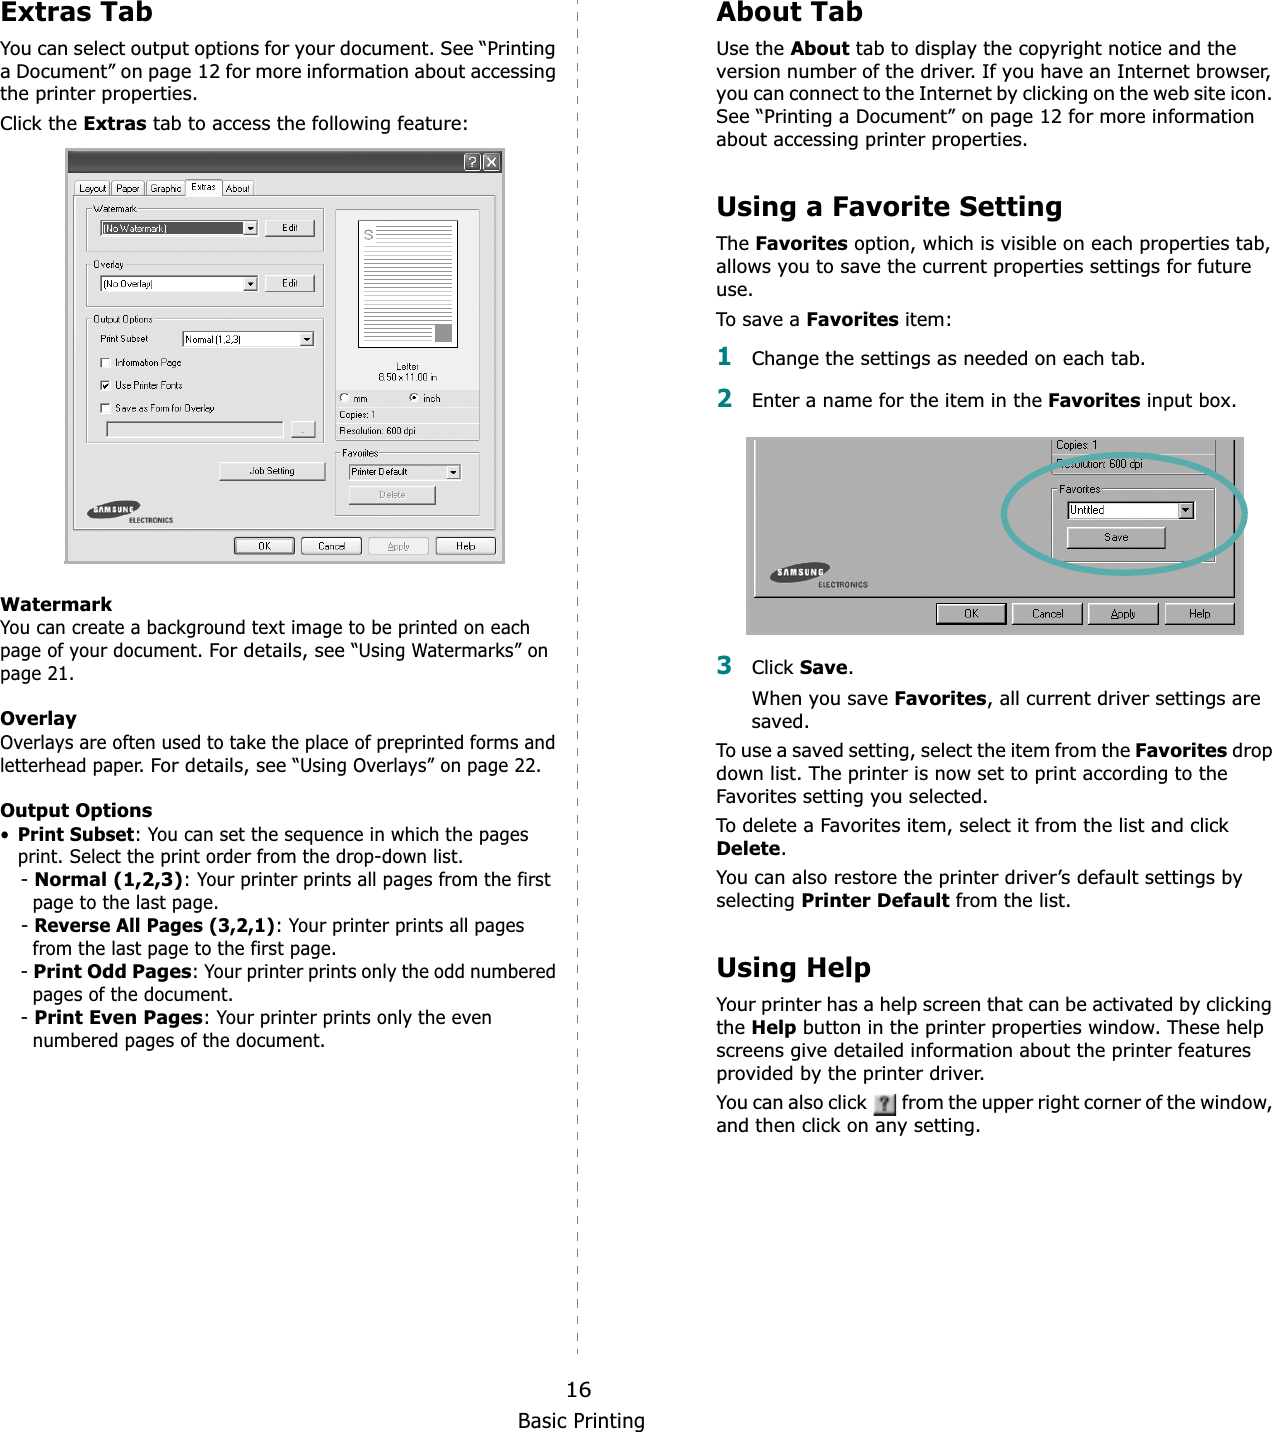 Basic Printing16Extras TabYou can select output options for your document. See “Printing a Document” on page 12 for more information about accessing the printer properties.Click the Extras tab to access the following feature:  WatermarkYou can create a background text image to be printed on each page of your document. For details, see “Using Watermarks” on page 21.OverlayOverlays are often used to take the place of preprinted forms and letterhead paper. For details, see “Using Overlays” on page 22.Output Options•Print Subset: You can set the sequence in which the pages print. Select the print order from the drop-down list.-Normal (1,2,3): Your printer prints all pages from the first page to the last page.-Reverse All Pages (3,2,1): Your printer prints all pages from the last page to the first page.-Print Odd Pages: Your printer prints only the odd numbered pages of the document.-Print Even Pages: Your printer prints only the even numbered pages of the document.About TabUse the About tab to display the copyright notice and the version number of the driver. If you have an Internet browser, you can connect to the Internet by clicking on the web site icon. See “Printing a Document” on page 12 for more information about accessing printer properties.Using a Favorite Setting TheFavorites option, which is visible on each properties tab, allows you to save the current properties settings for future use.To s ave a Favorites item:1Change the settings as needed on each tab. 2Enter a name for the item in the Favorites input box. 3Click Save.When you save Favorites, all current driver settings are saved.To use a saved setting, select the item from the Favorites drop down list. The printer is now set to print according to the Favorites setting you selected. To delete a Favorites item, select it from the list and click Delete.You can also restore the printer driver’s default settings by selectingPrinter Default from the list. Using HelpYour printer has a help screen that can be activated by clicking theHelp button in the printer properties window. These help screens give detailed information about the printer features provided by the printer driver.You can also click   from the upper right corner of the window, and then click on any setting. 